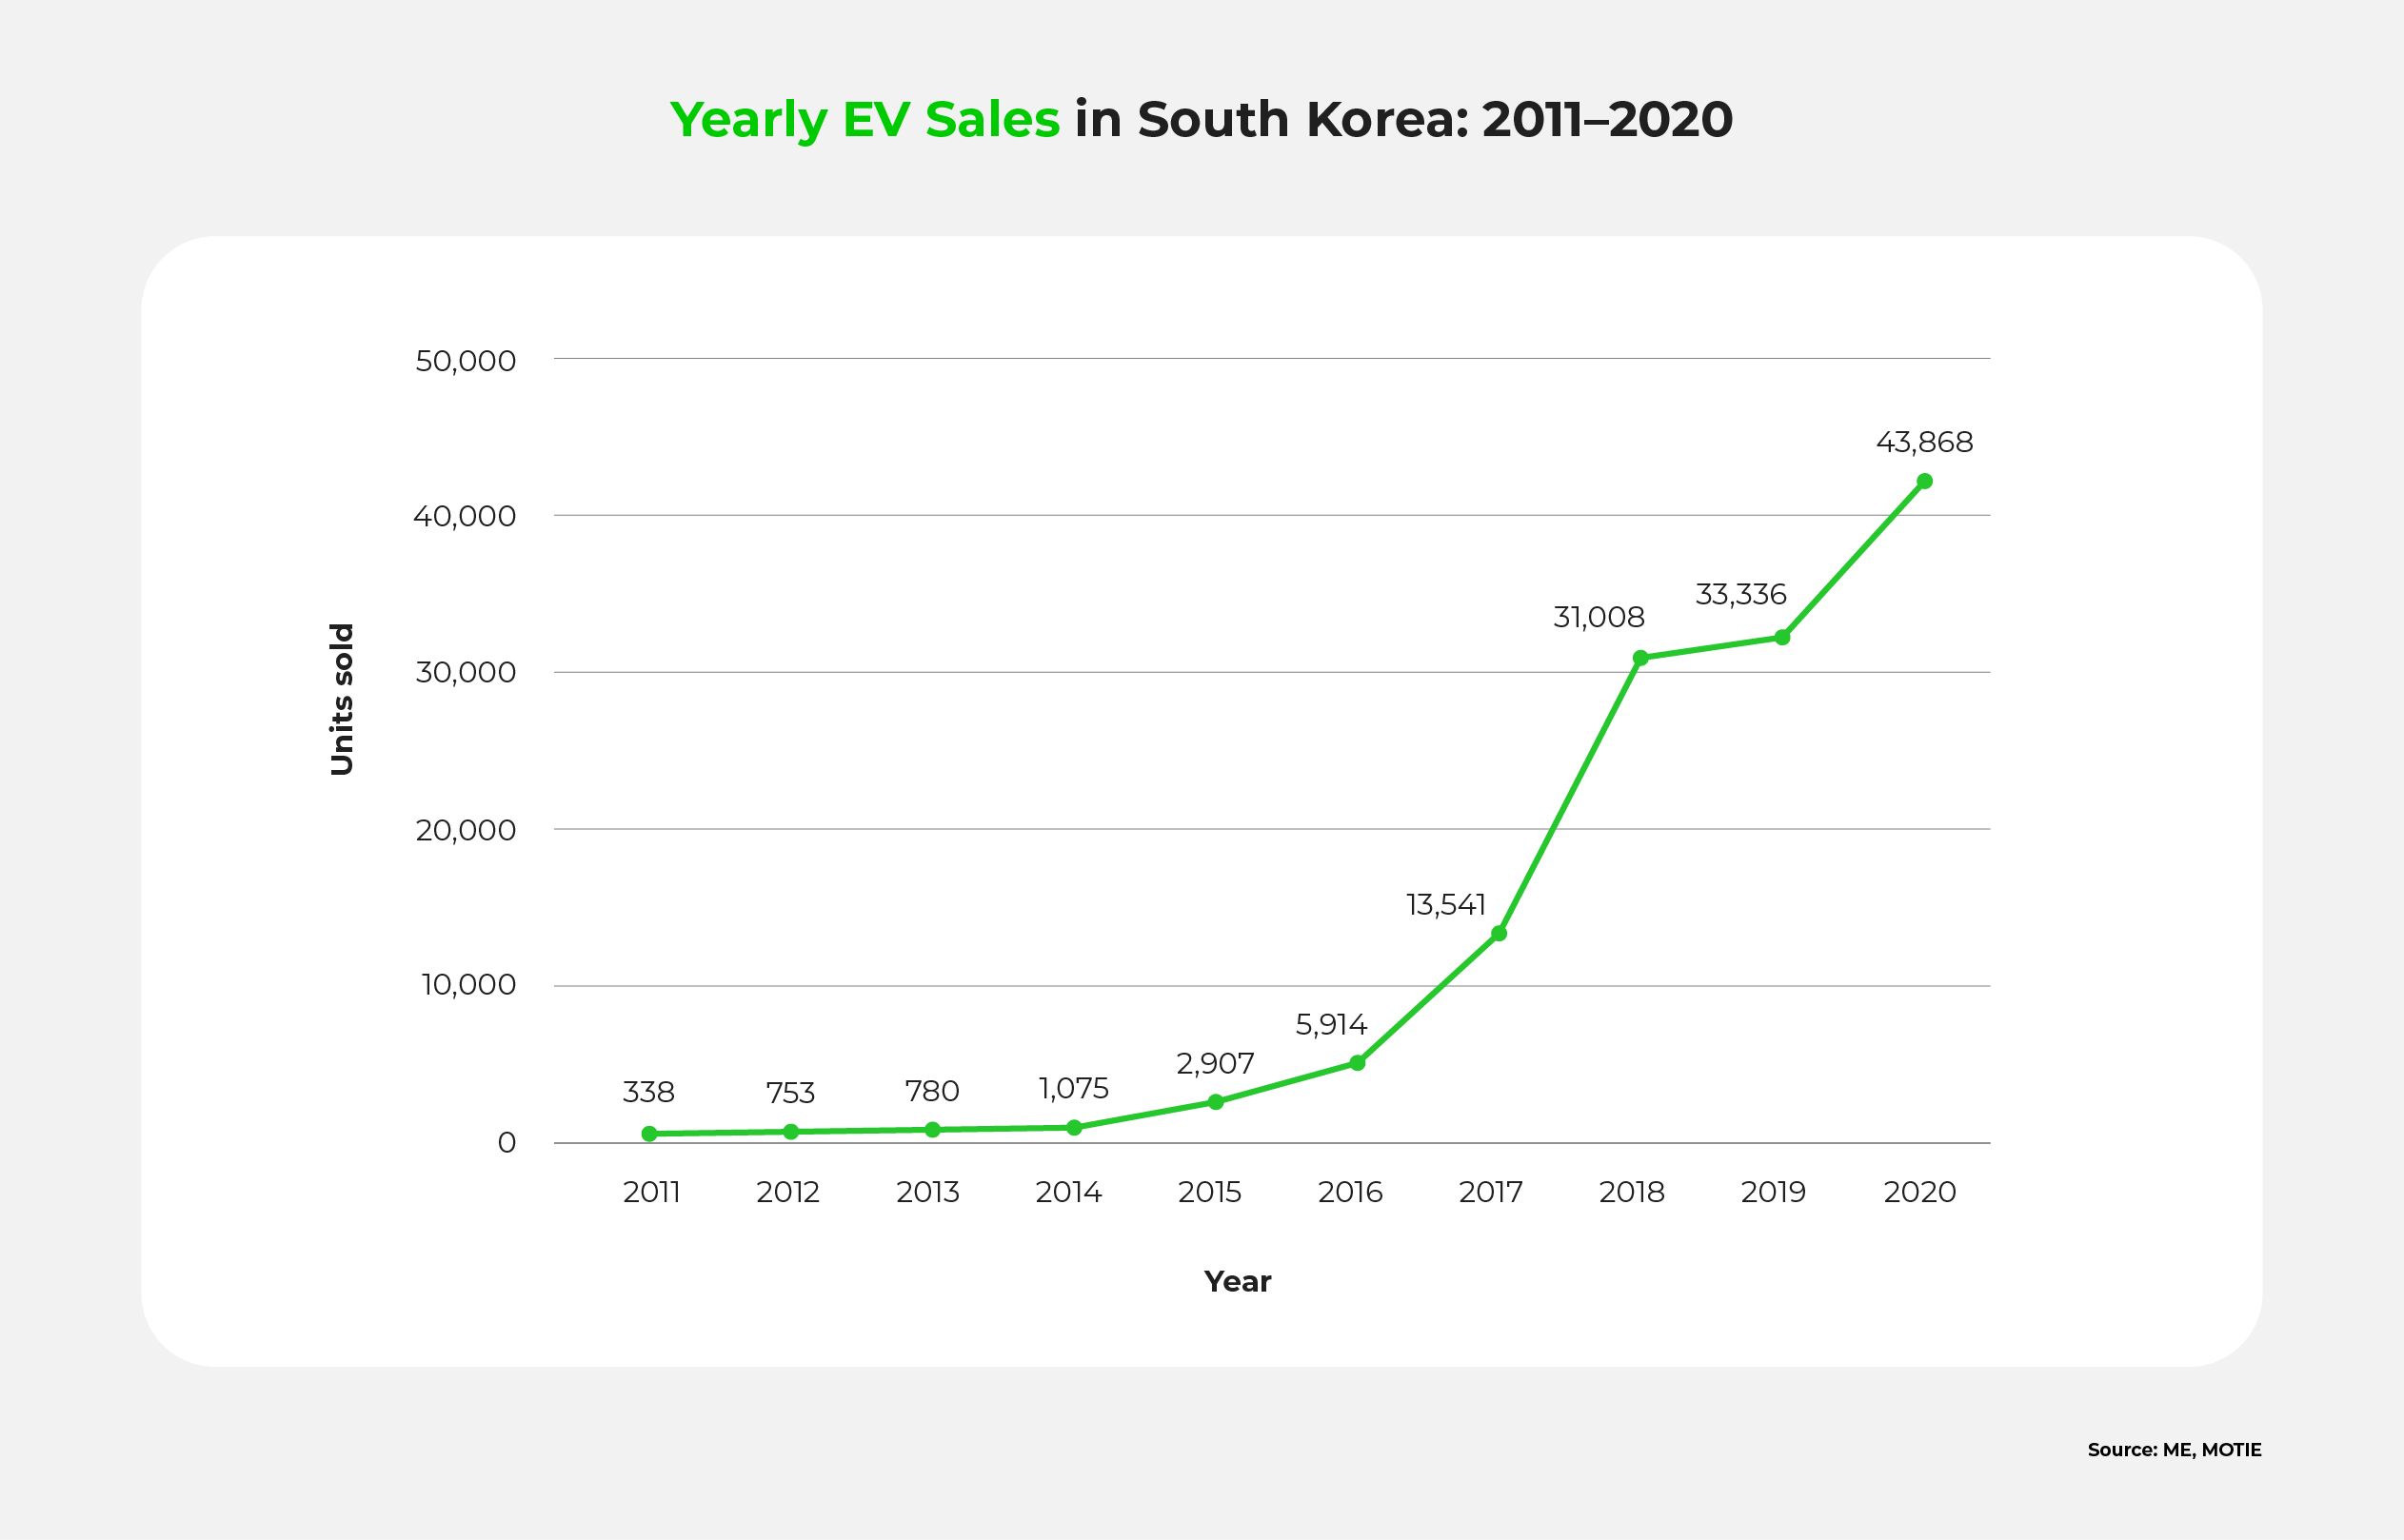 A graph showing South Korea's annual EV sales from 2011 to 2020